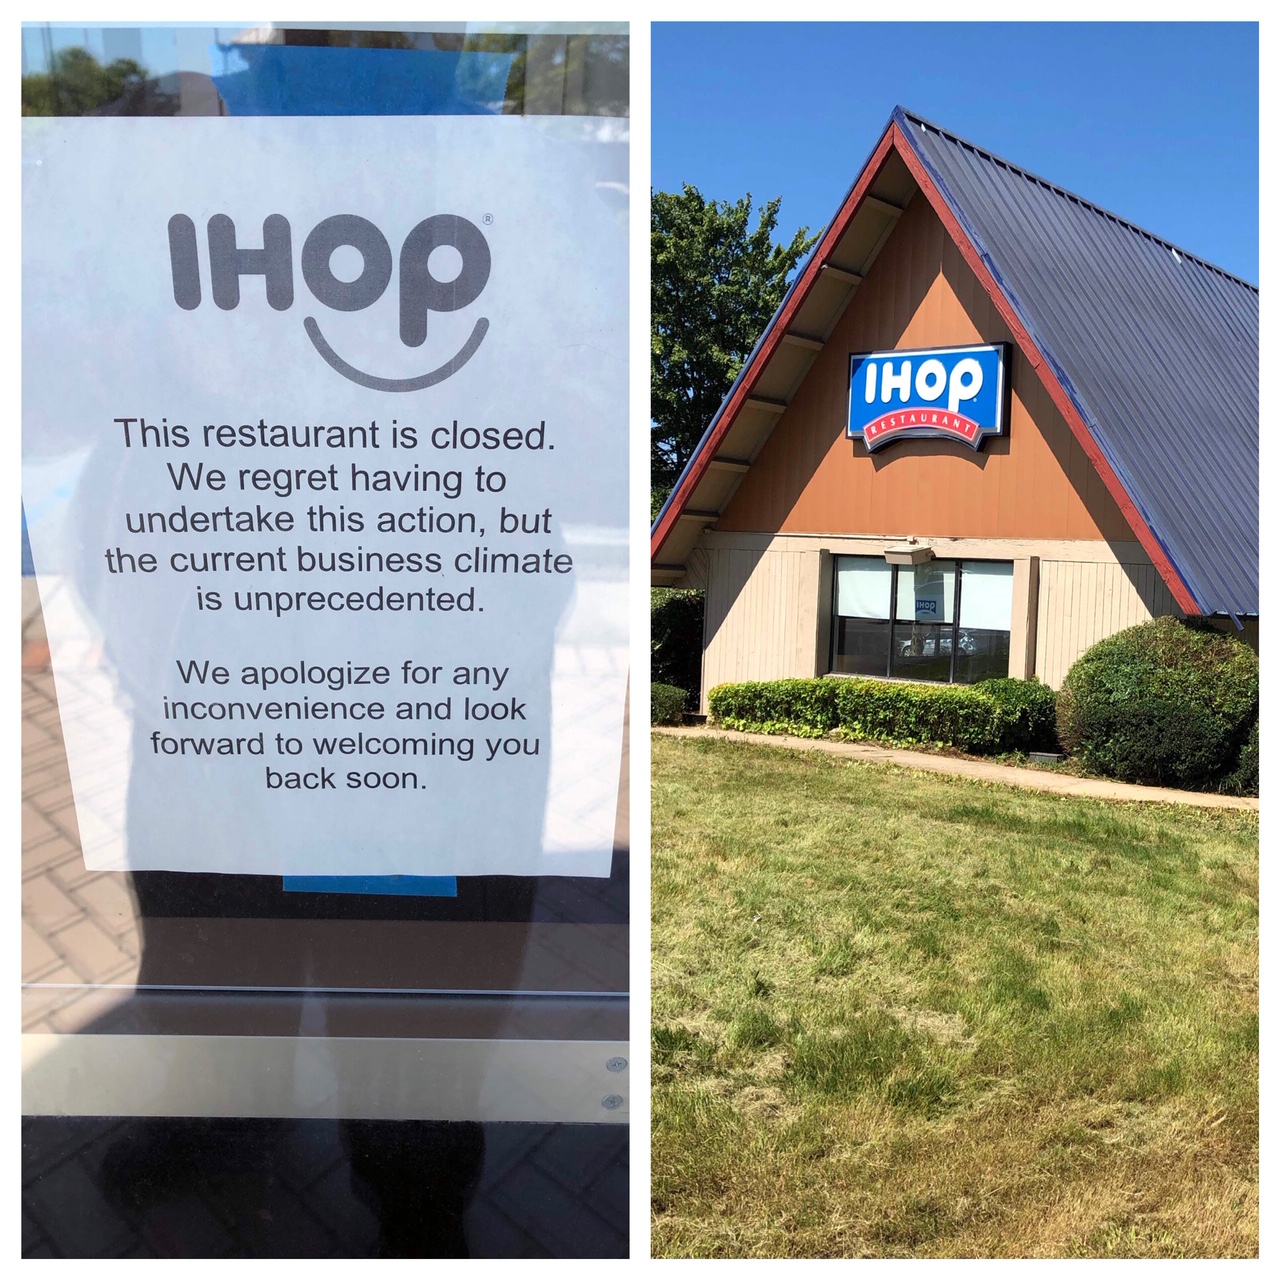 Assembly Street IHOP reopens under new ownership after seven month closure, Business